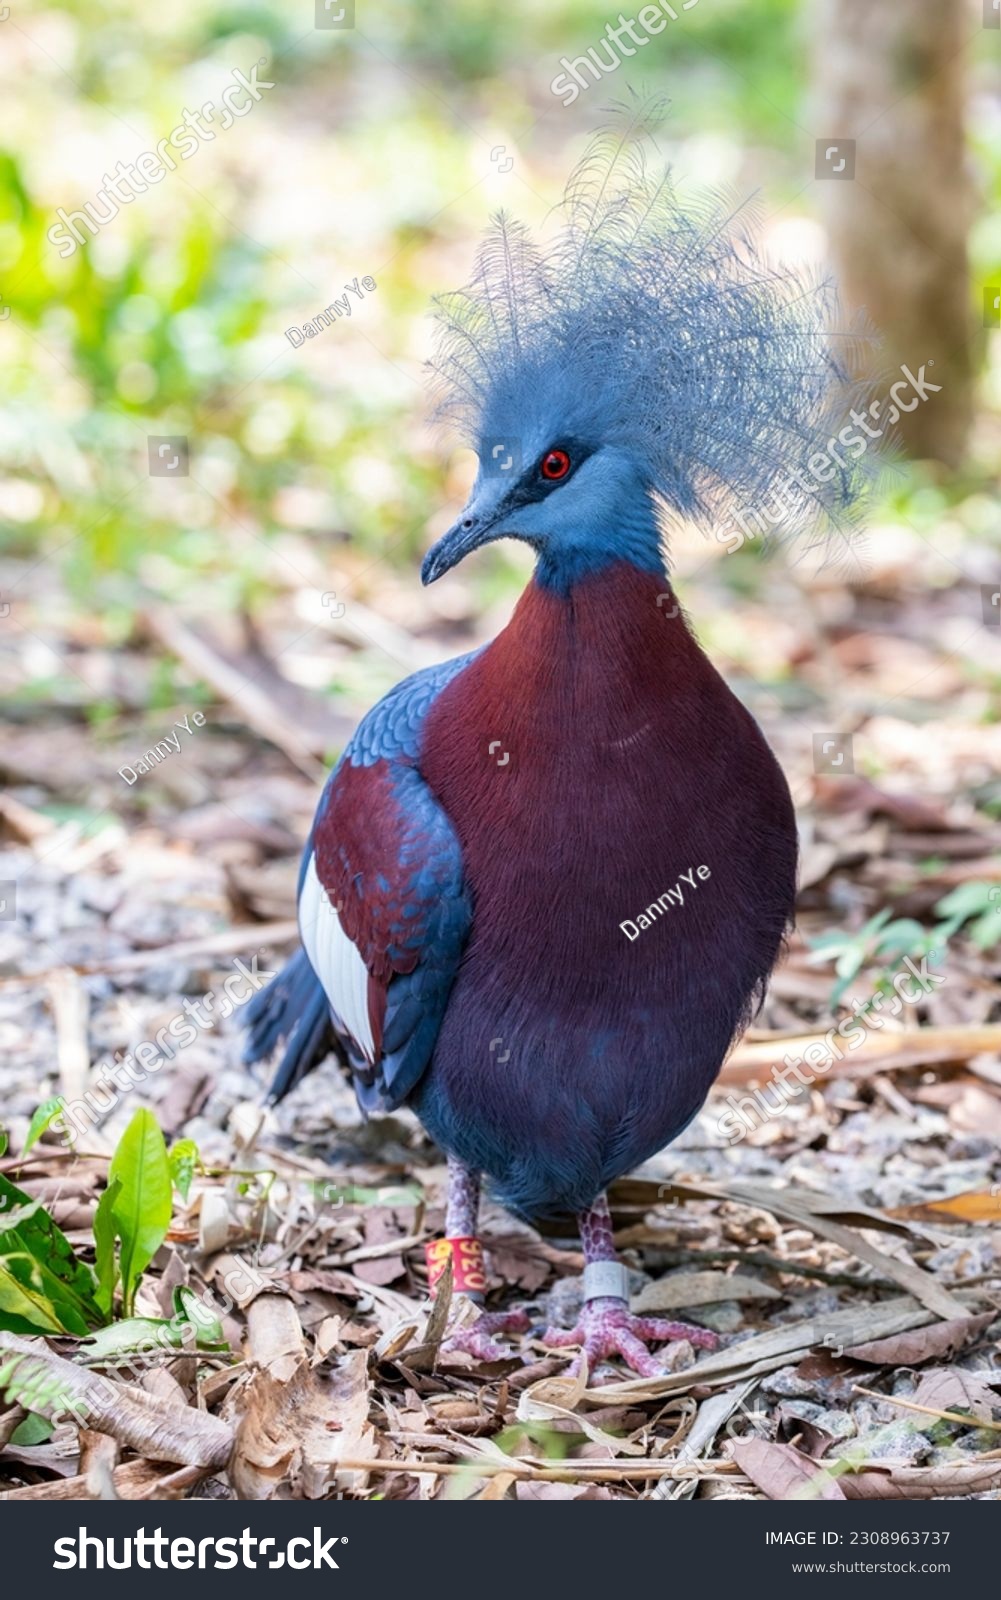 Sclater's crowned pigeon (Goura sclaterii) is a large, terrestrial pigeon confined to the southern lowland forests of New Guinea.
It has a bluish-grey plumage with elaborate blue lacy crests. #2308963737